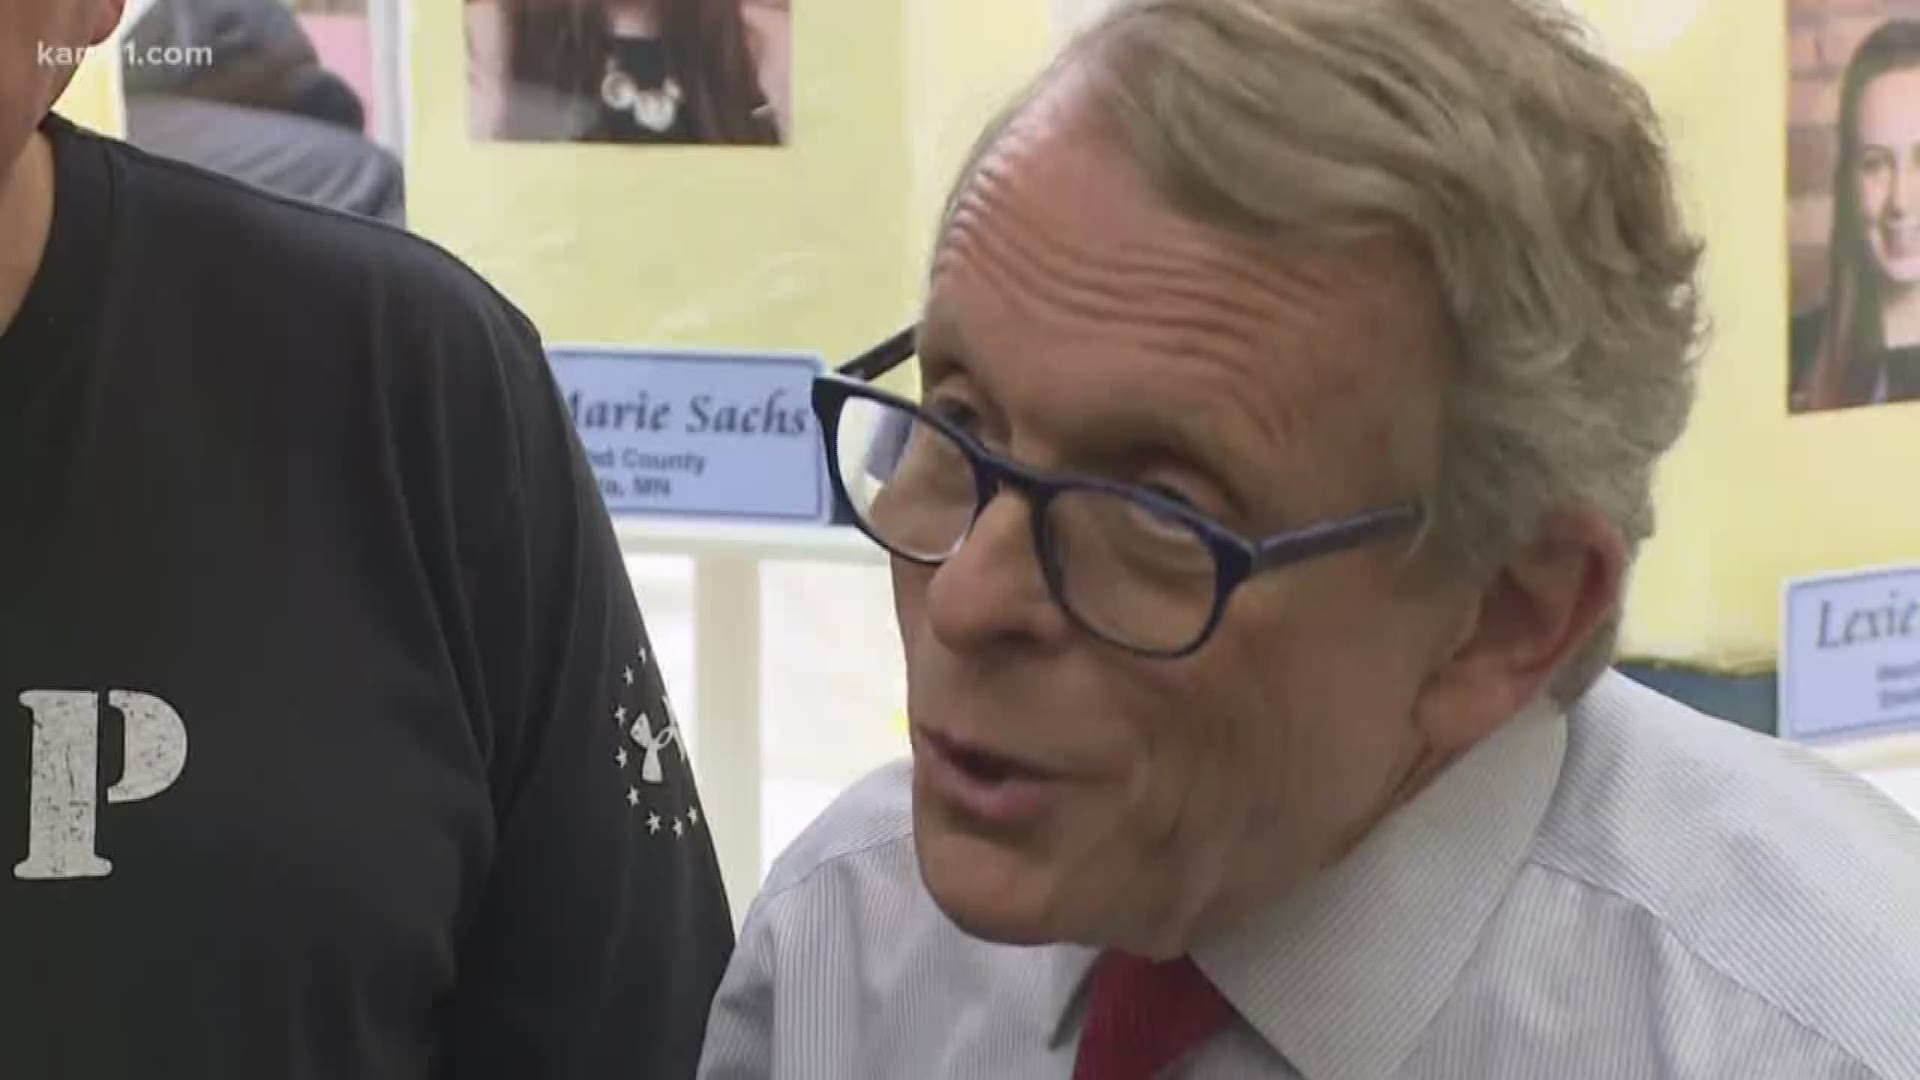 Ohio Governor Mike DeWine always heard about how great the Minnesota fair was and when he took office this year he wanted to see it for himself.